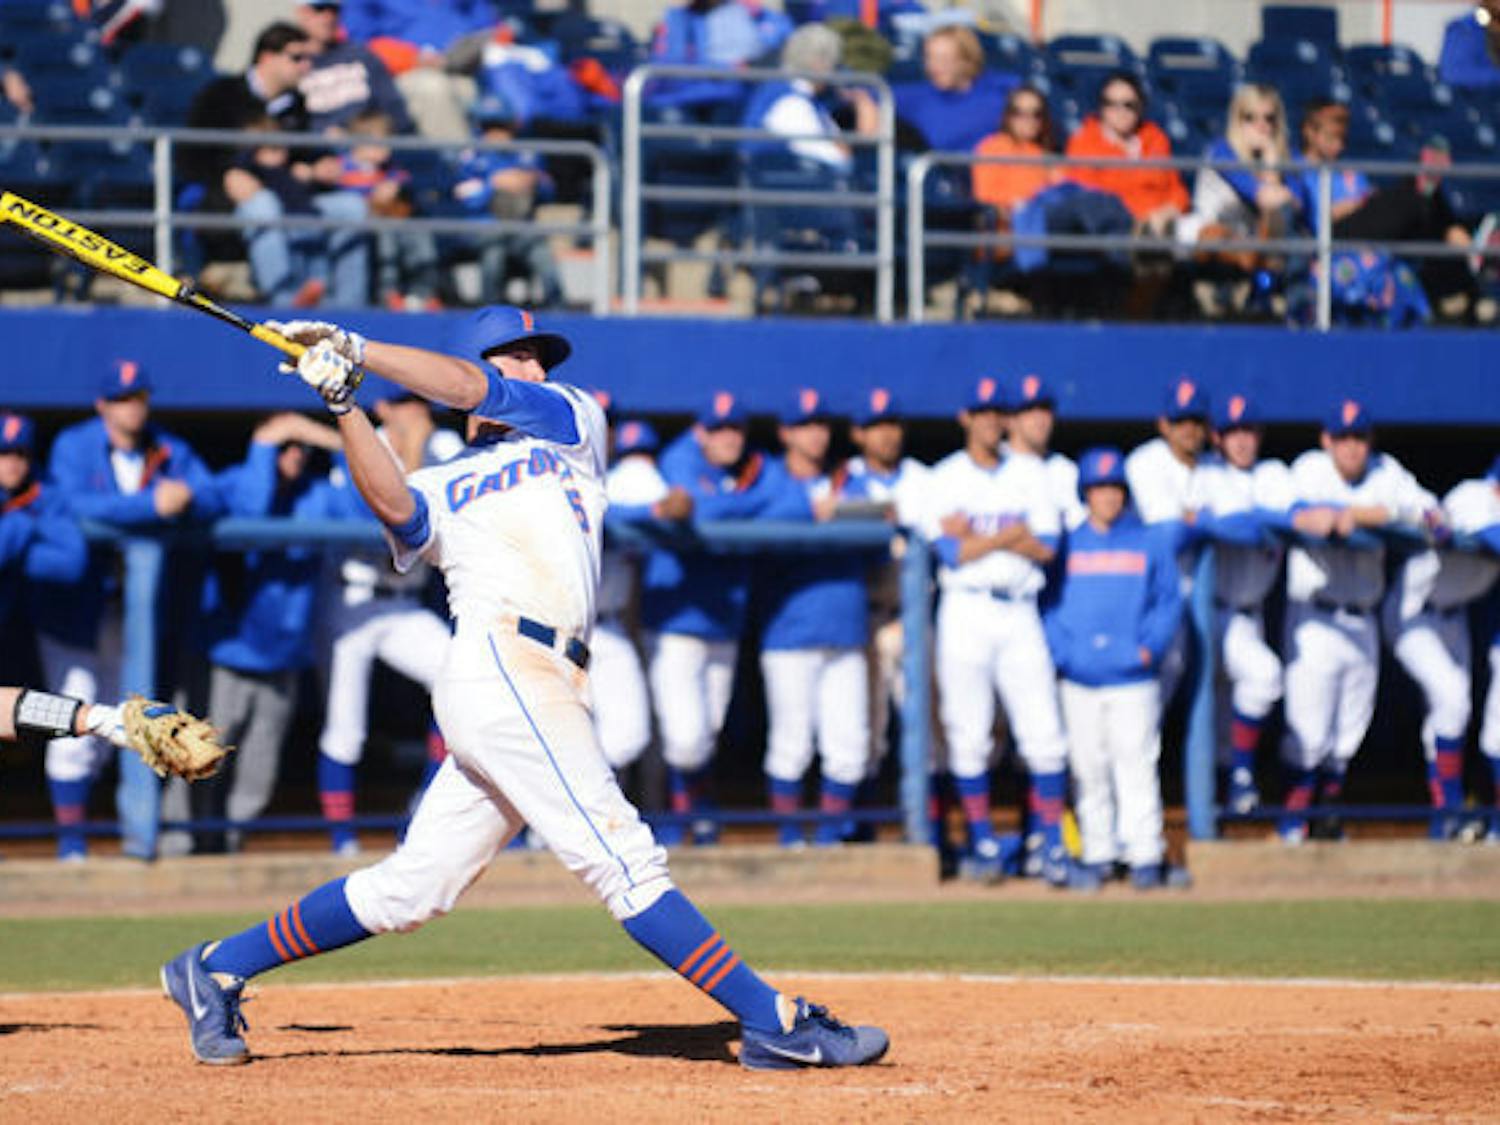 Sophomore first baseman Zack Powers hits the second of his two grand slams during Florida’s 16-5 win against Duke on Sunday at McKethan Stadium. Powers, who missed 2012 with a torn labrum, finished the Gator’ series-clinching victory with nine RBI.